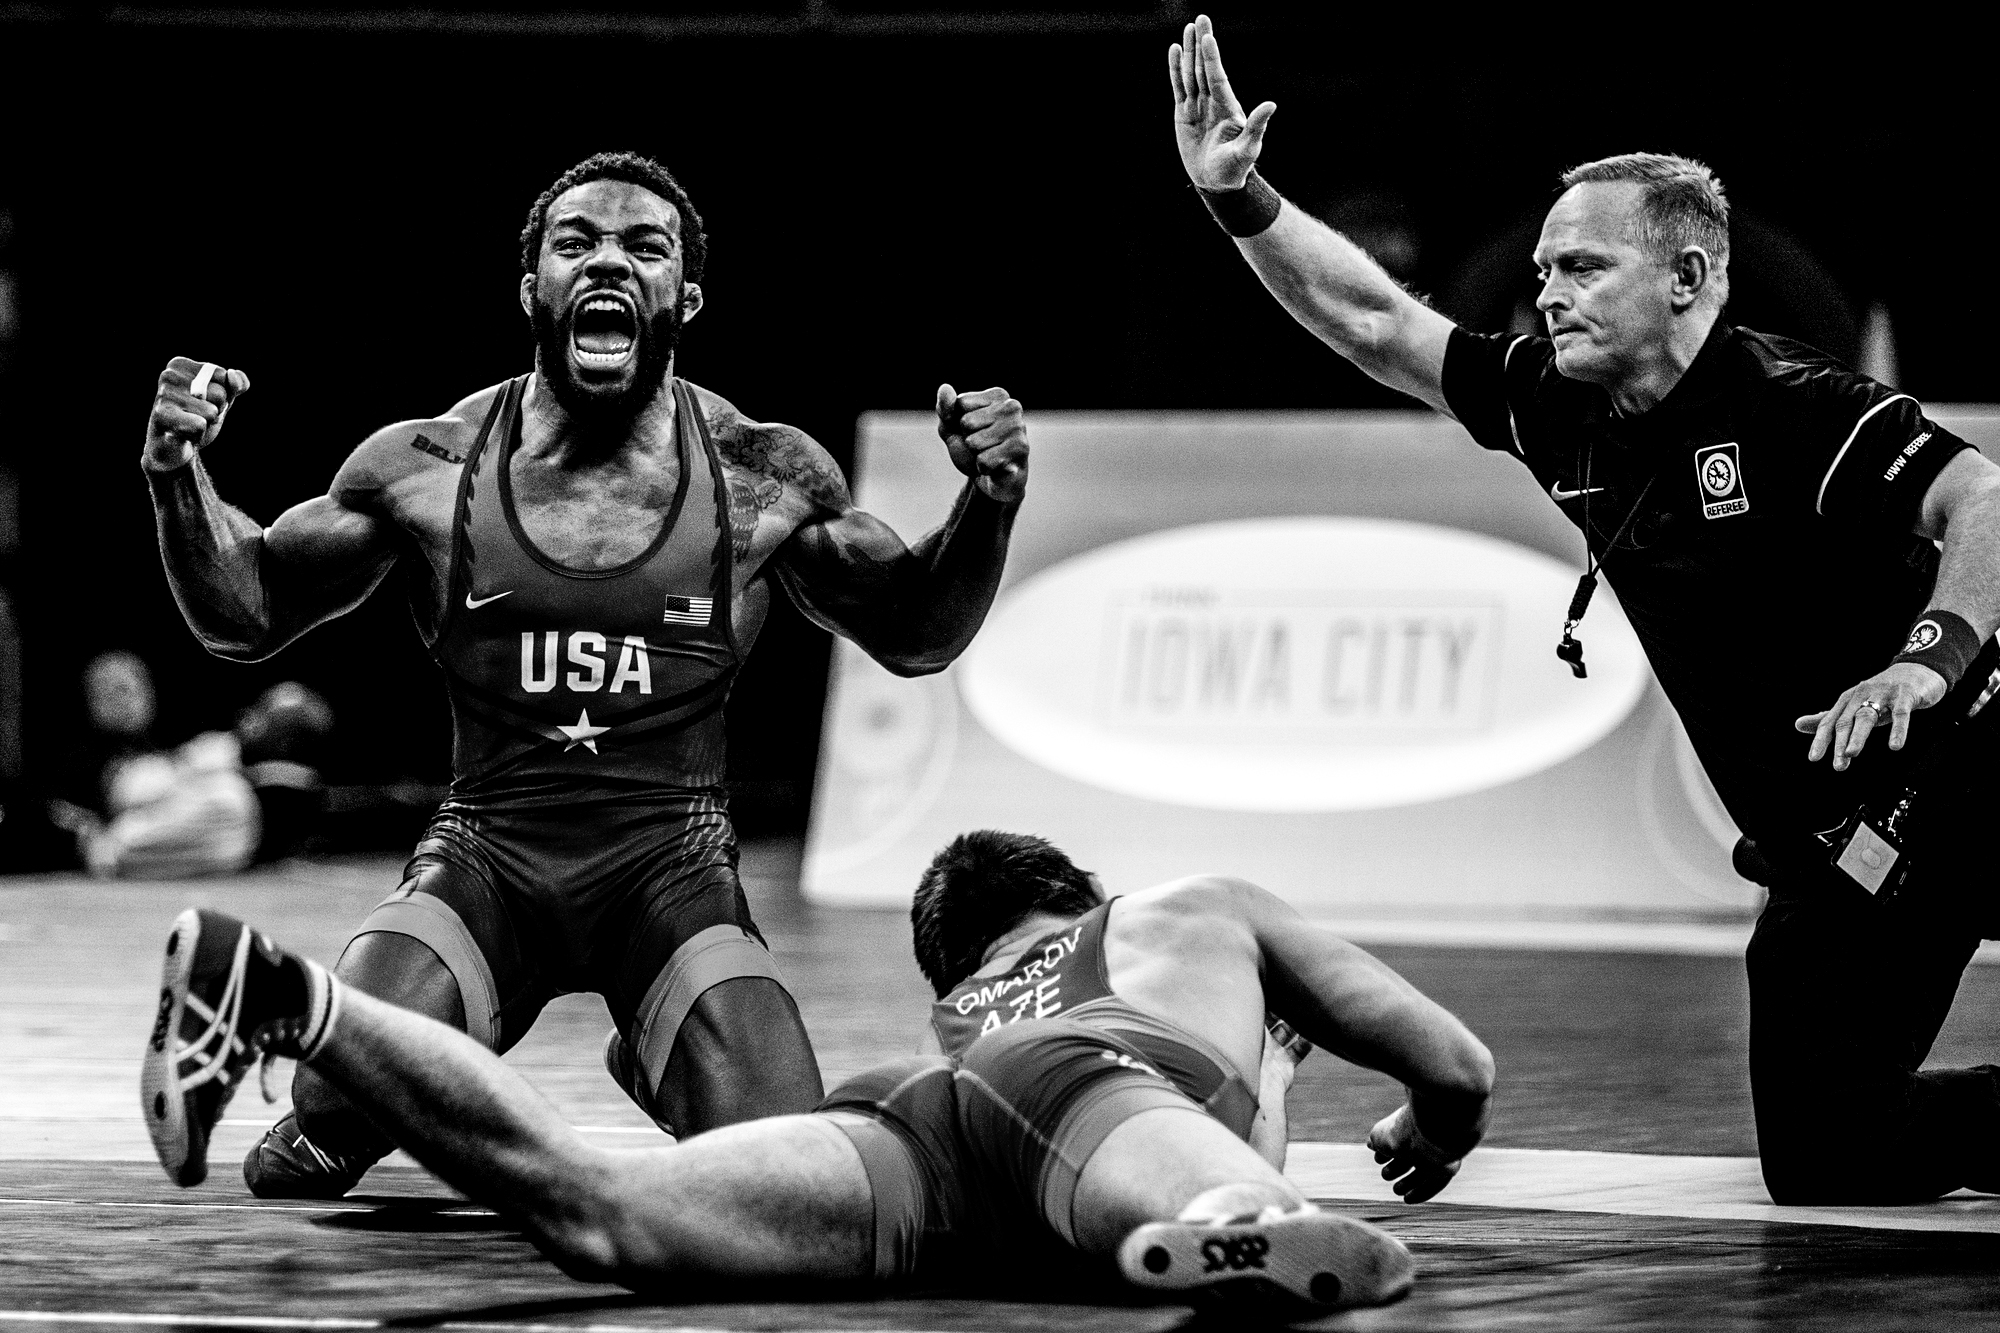  America's Jordan Burroughs, left, celebrates his victory over Azerbaijan's Gasjimurad Omarov in a 74 kg bout during the final round of the 2018 Men's Freestyle World Cup at Carver-Hawkeye Arena, Saturday, April 7, 2018 in Iowa City. 